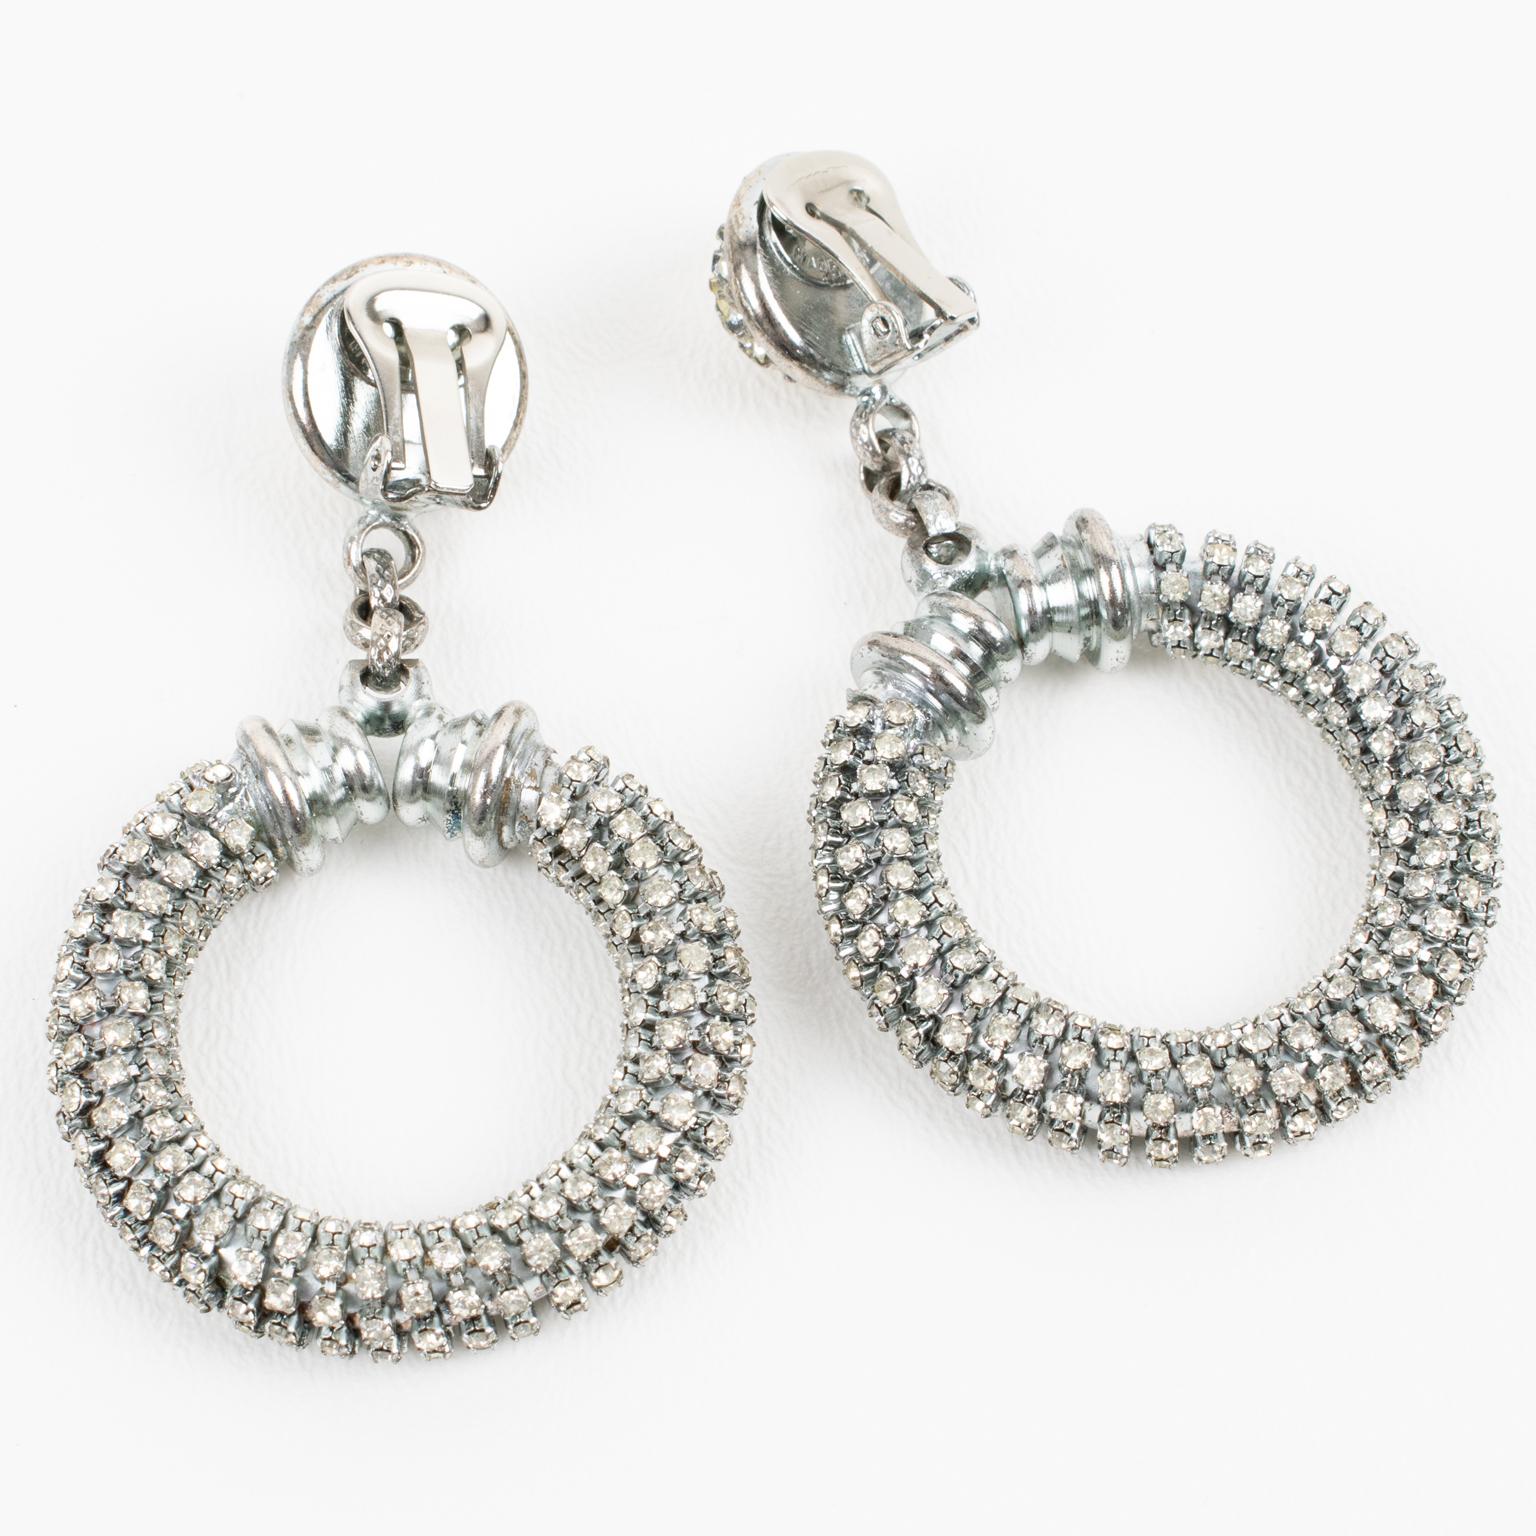 Gianfranco Ferre Crystal Jeweled Dangle Clip Earrings In Good Condition For Sale In Atlanta, GA